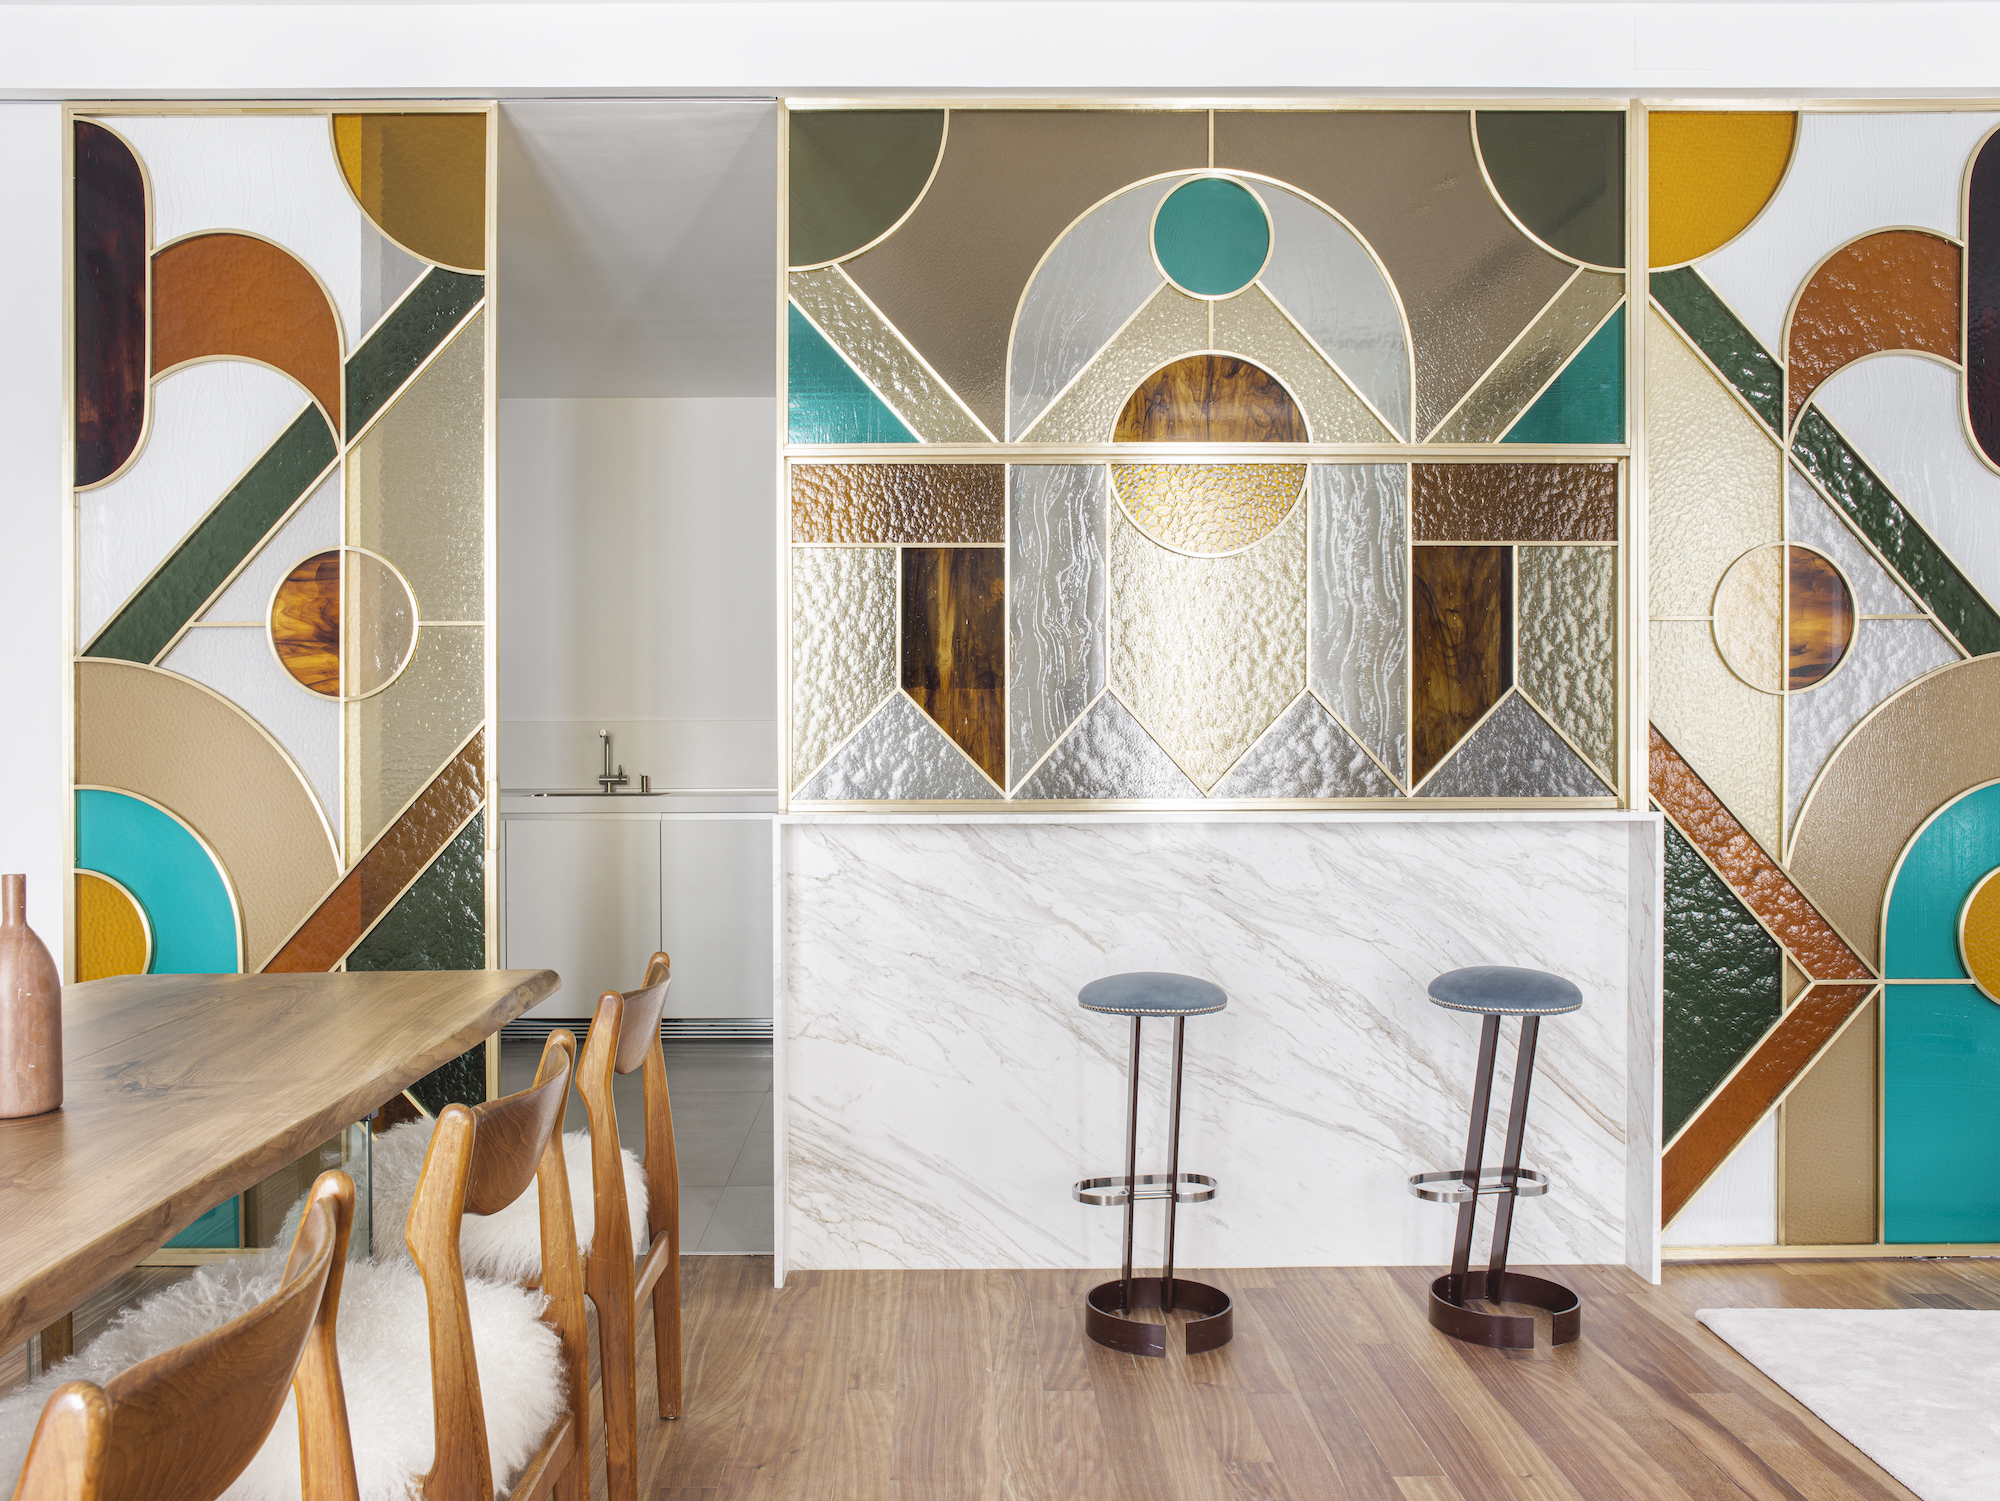 Emerging kitchen design trend – stained glass - Effect Magazine